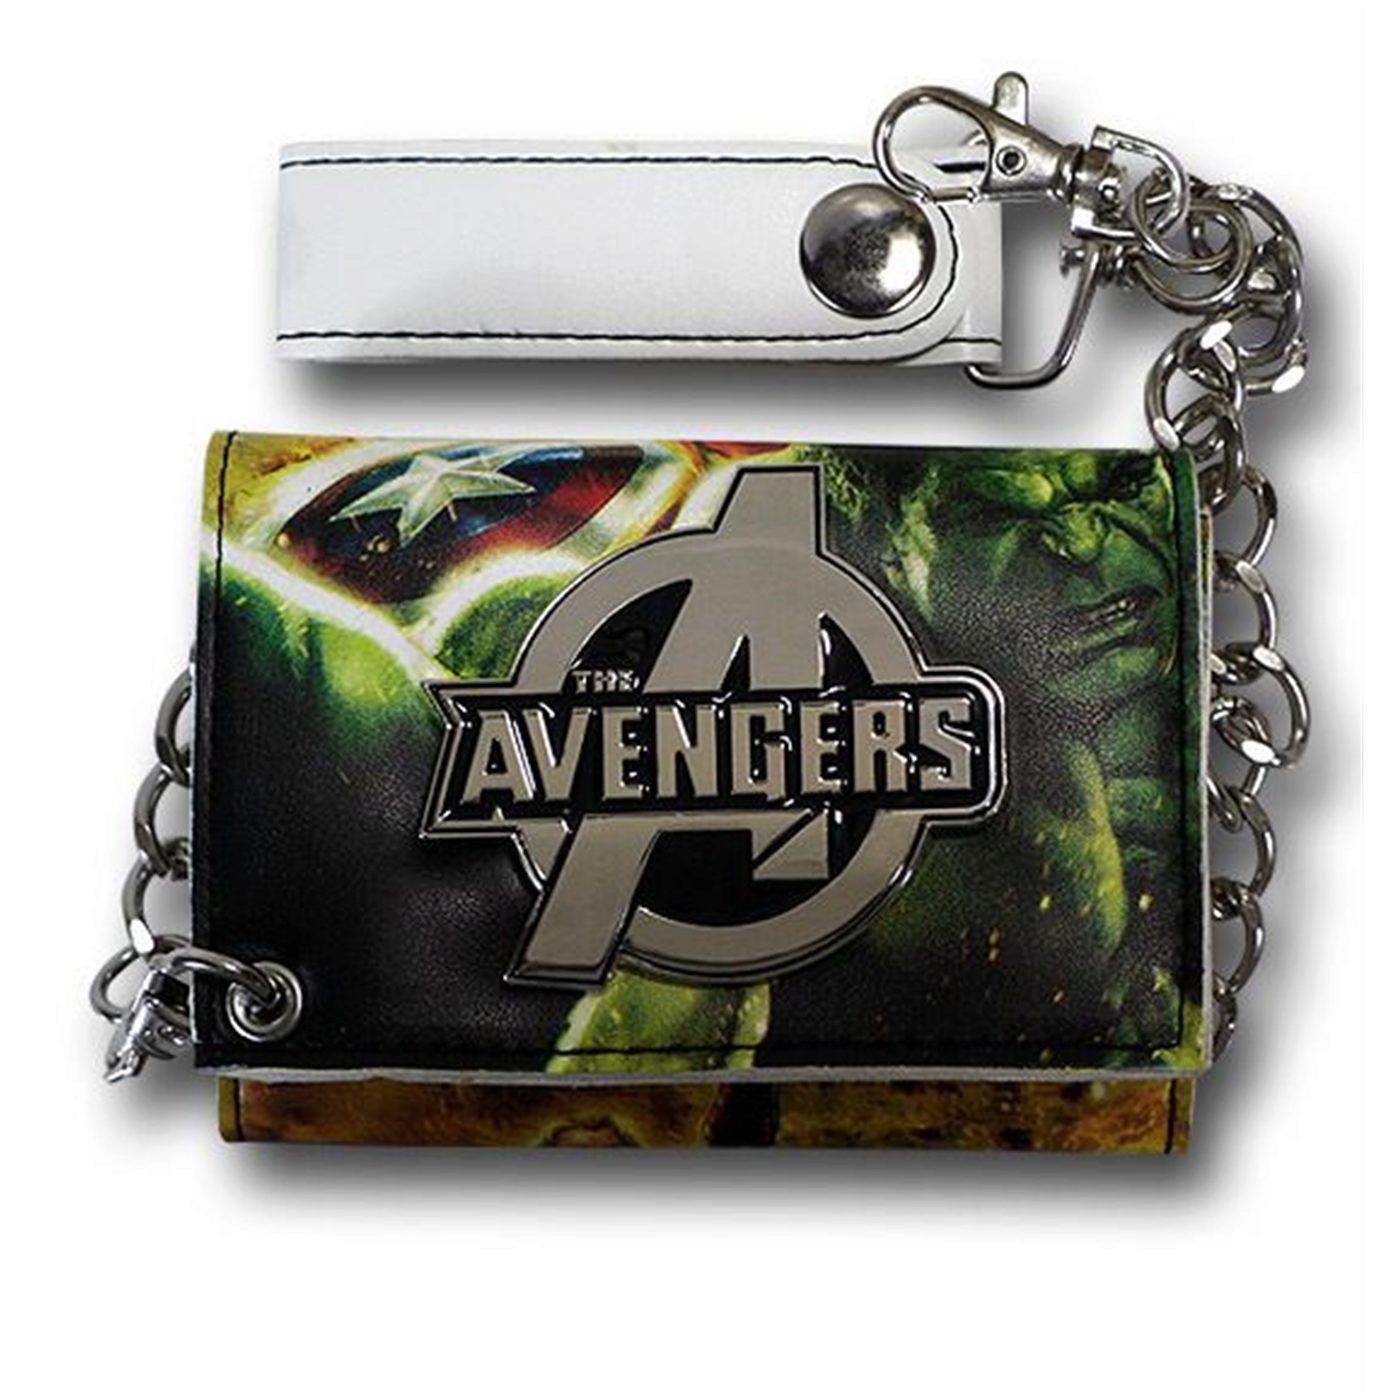 Avengers Movie Chain Wallet